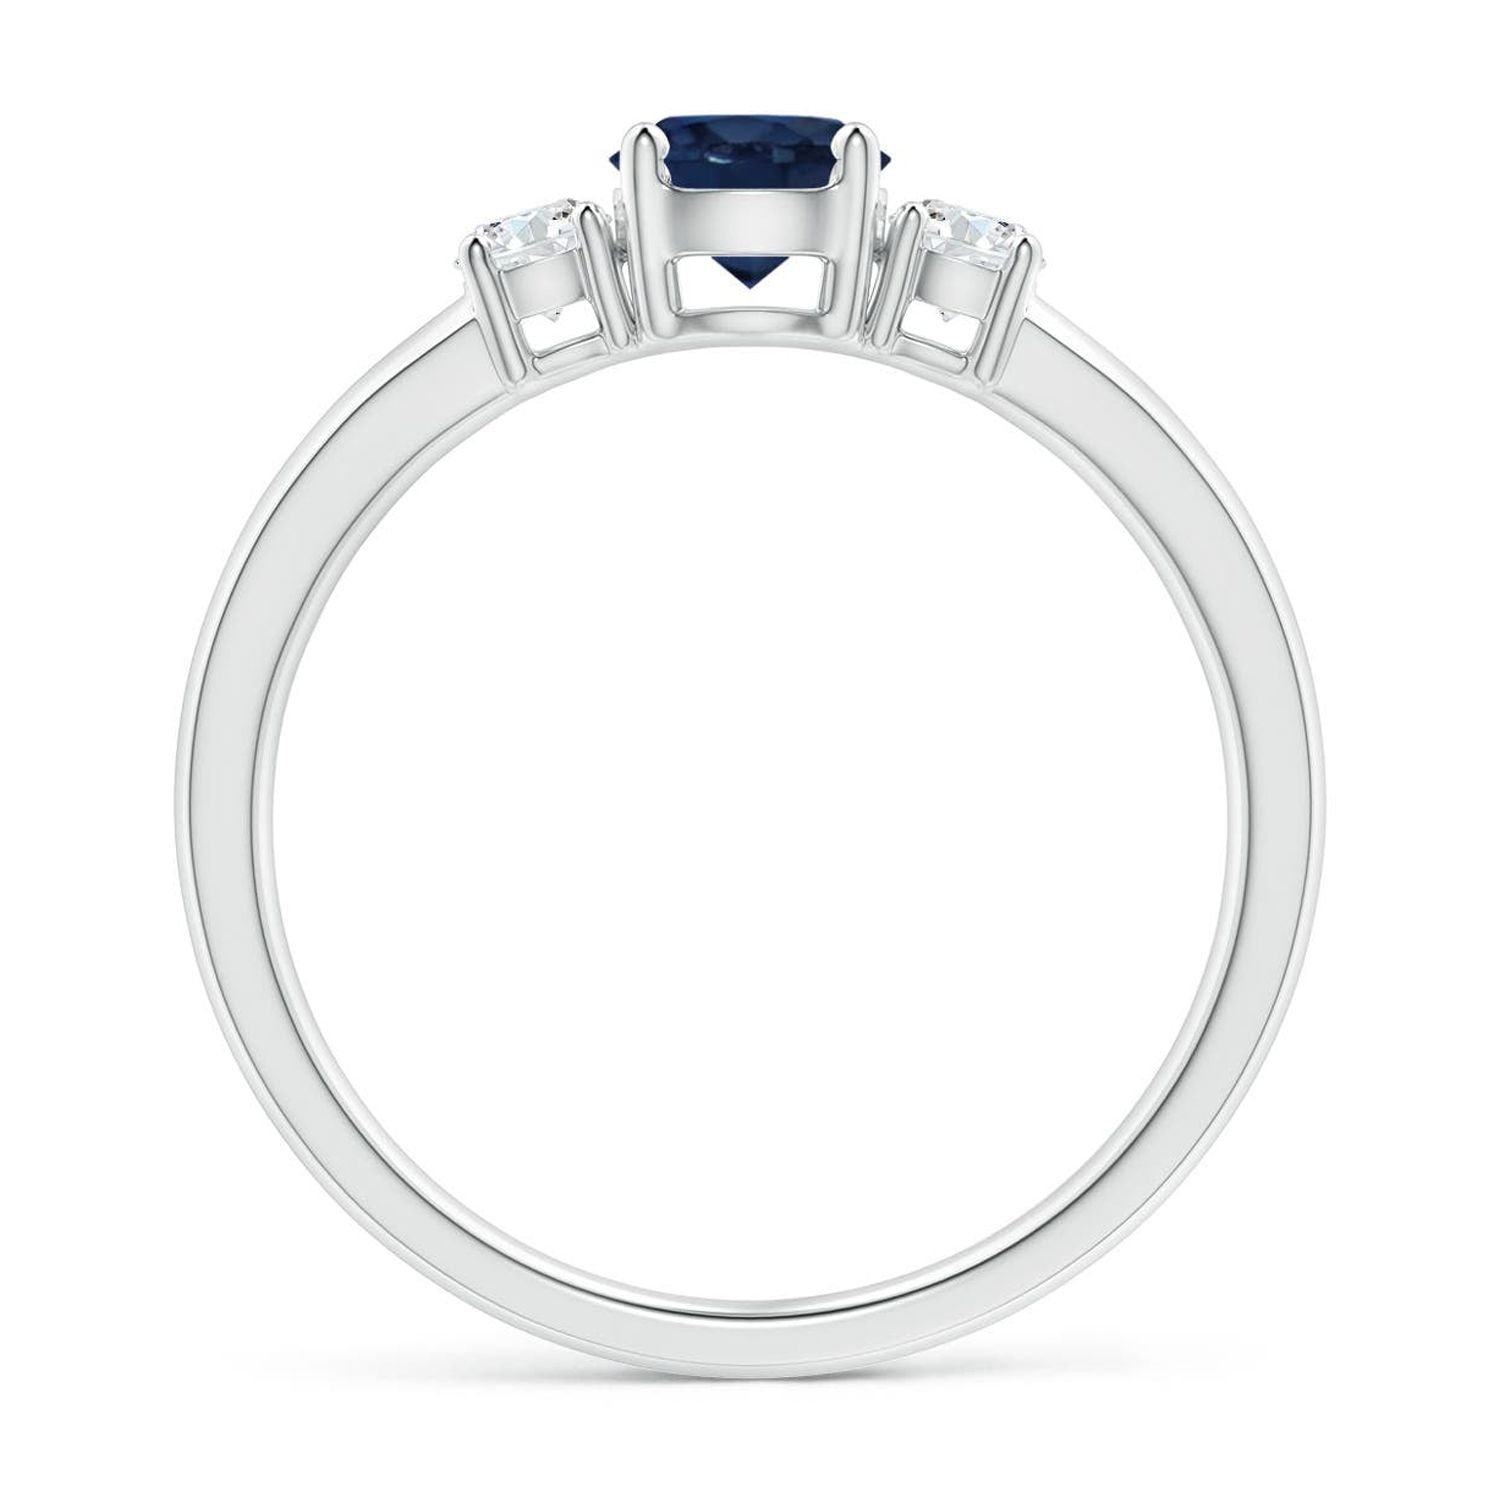 Angara Natural 0.6 Ct. Blue Sapphire with Diamond Classic Ring in ...